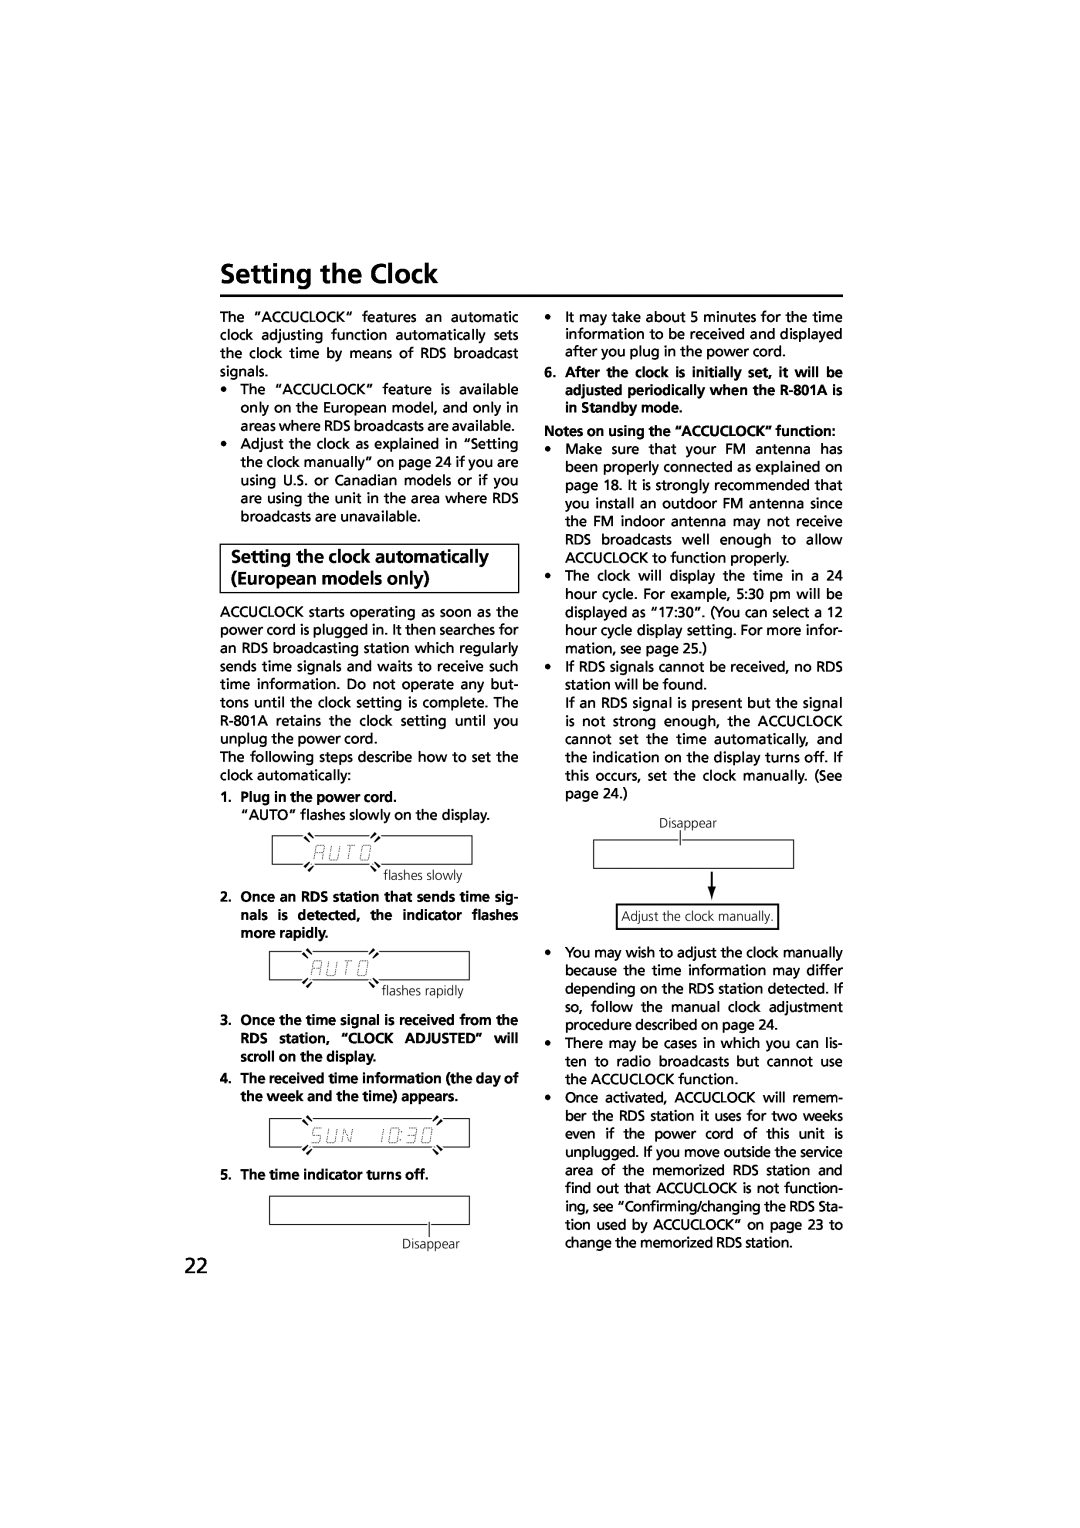 Onkyo R-801A instruction manual Setting the Clock, Plug in the power cord, The time indicator turns off 